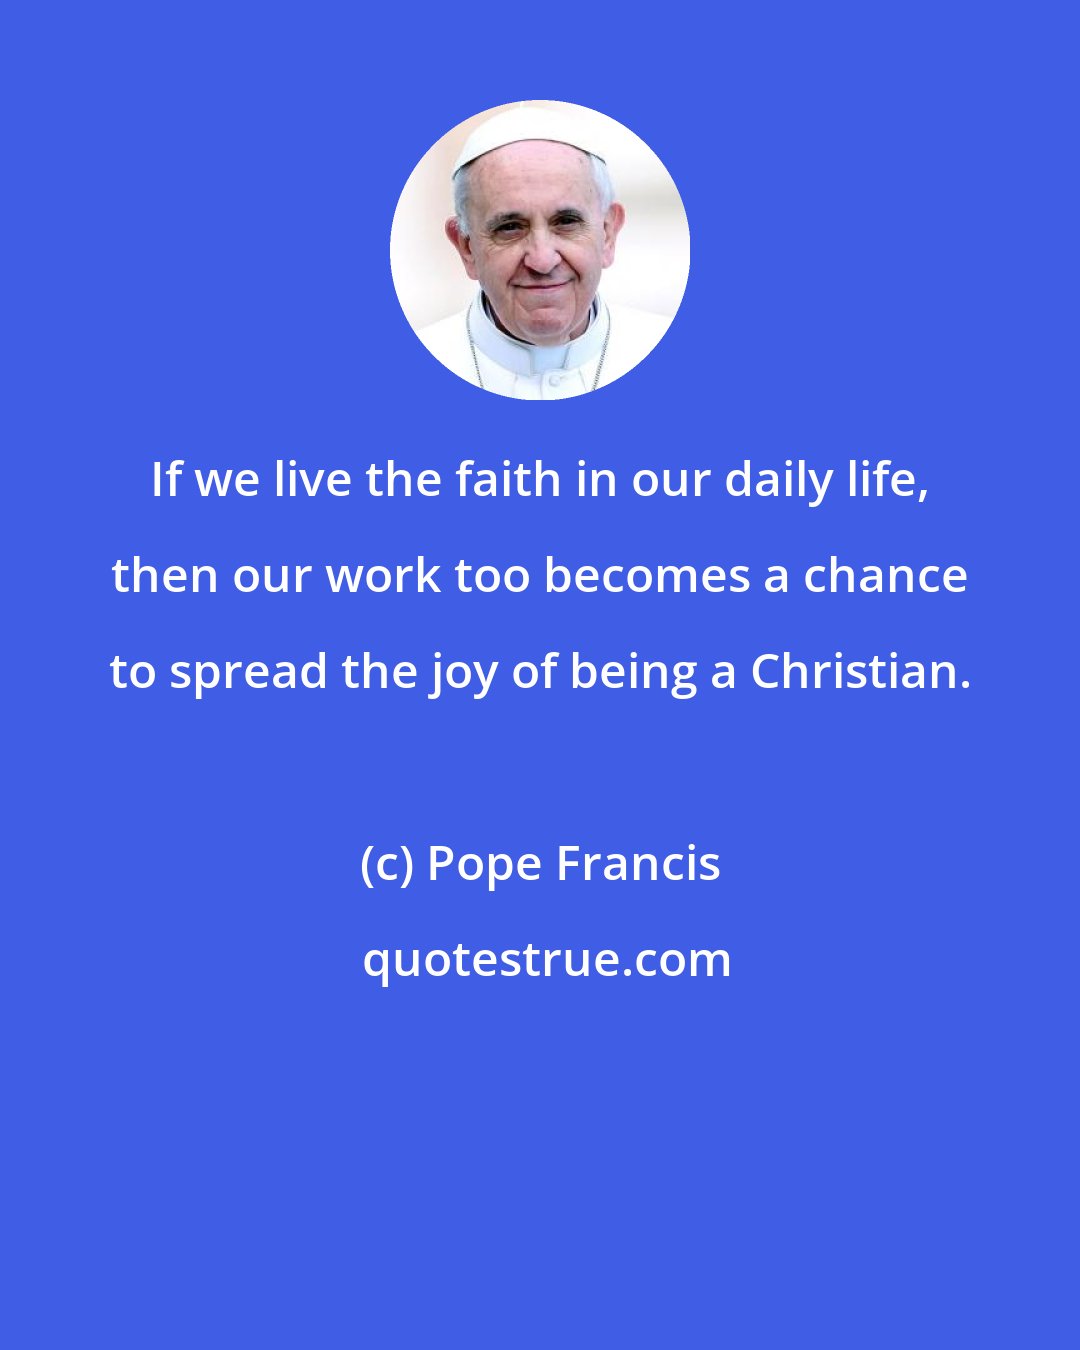 Pope Francis: If we live the faith in our daily life, then our work too becomes a chance to spread the joy of being a Christian.